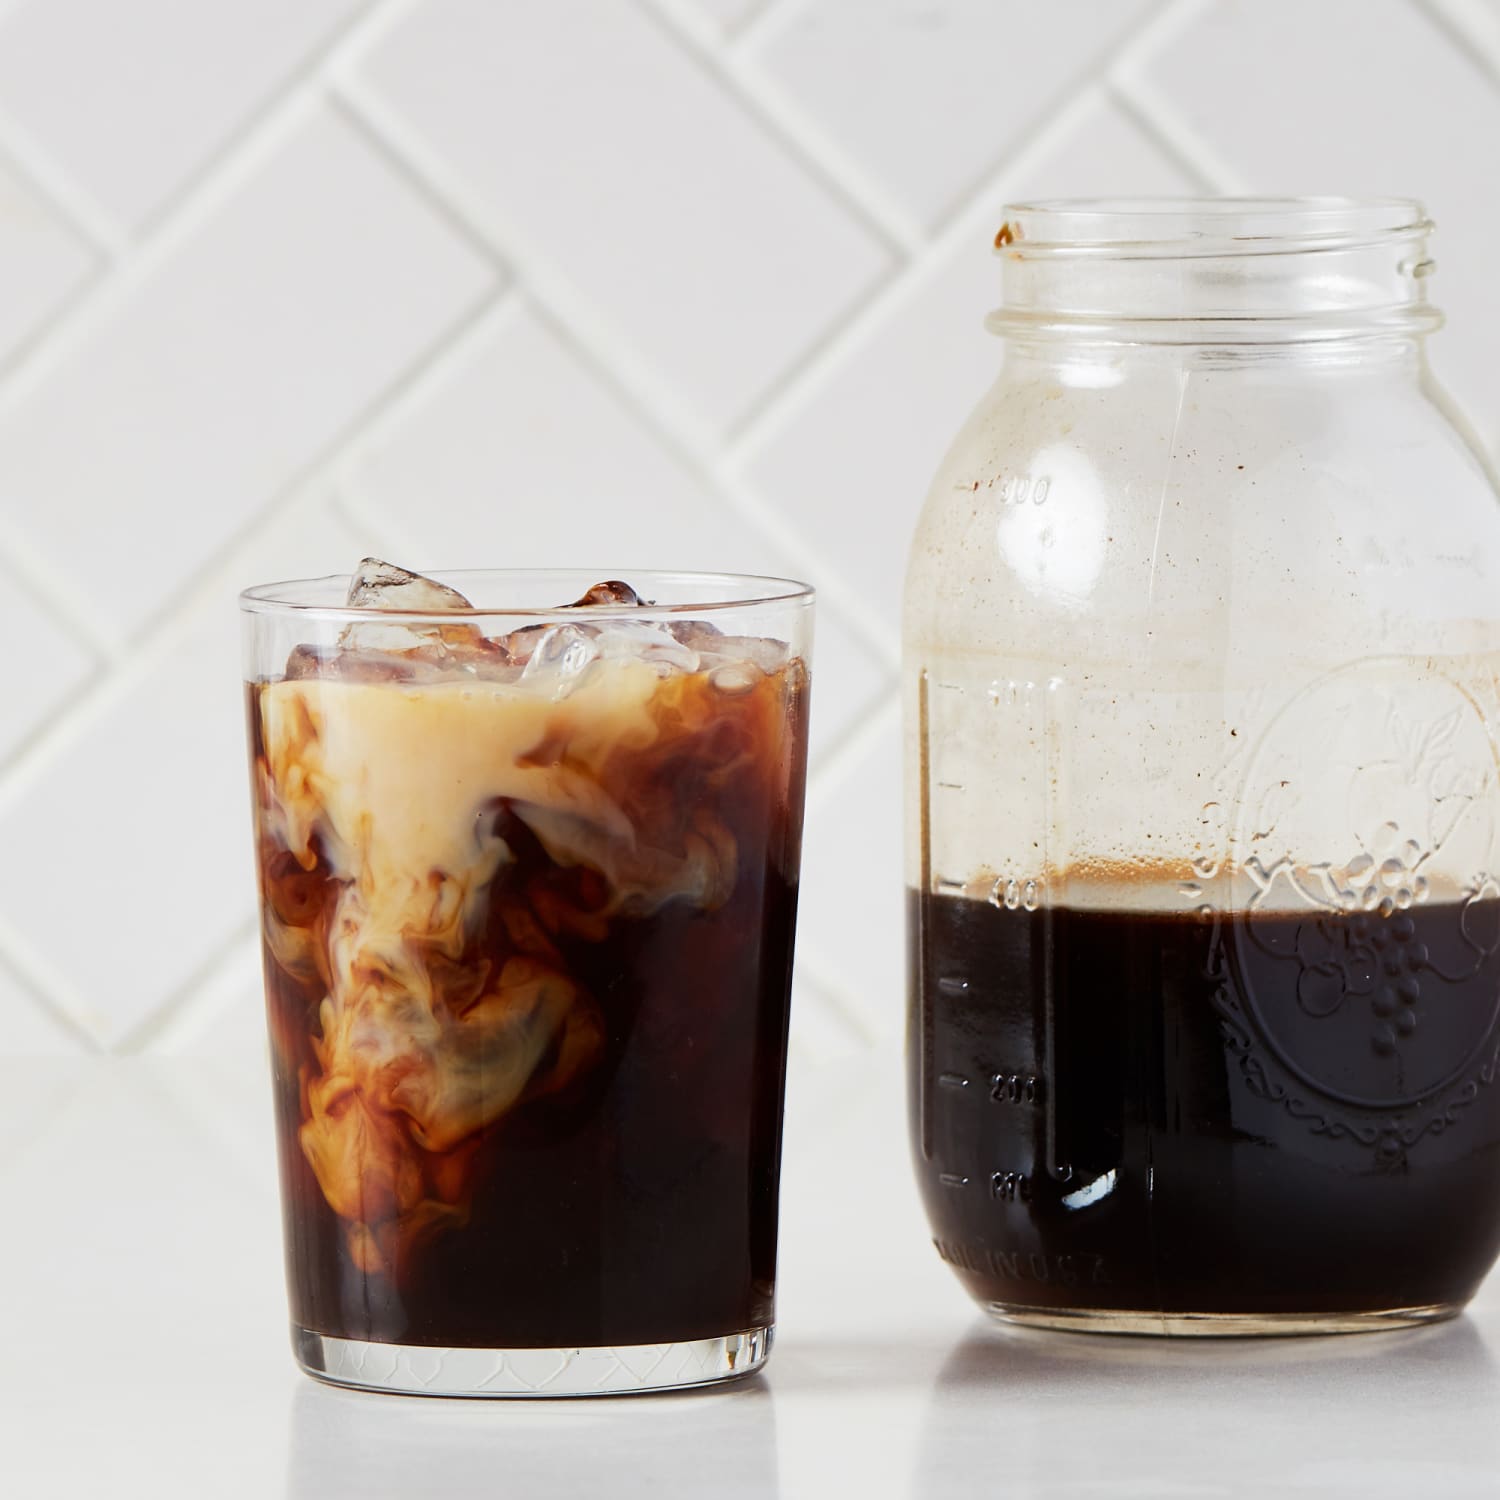 Takeya Cold Brew Coffee Maker Review: Function Over Form